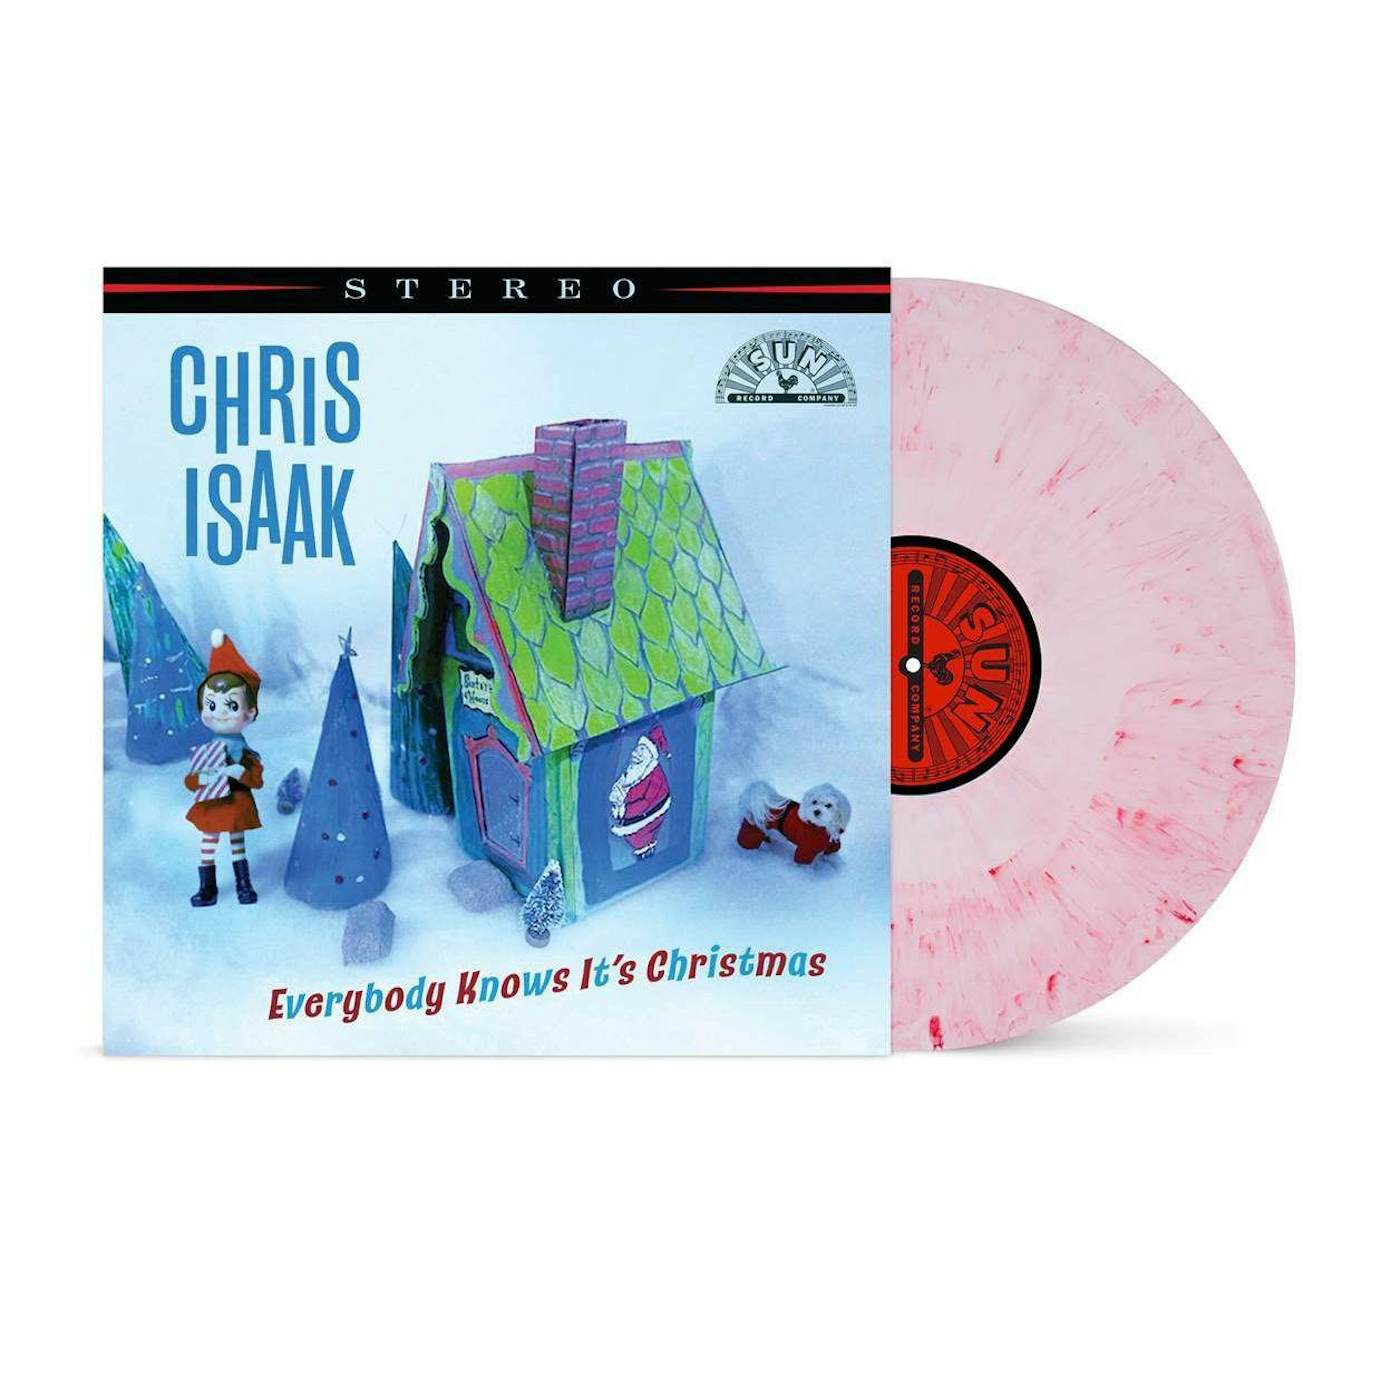 Chris Isaak Everybody Knows It's Christmas (Candy Floss Colored) Vinyl Record